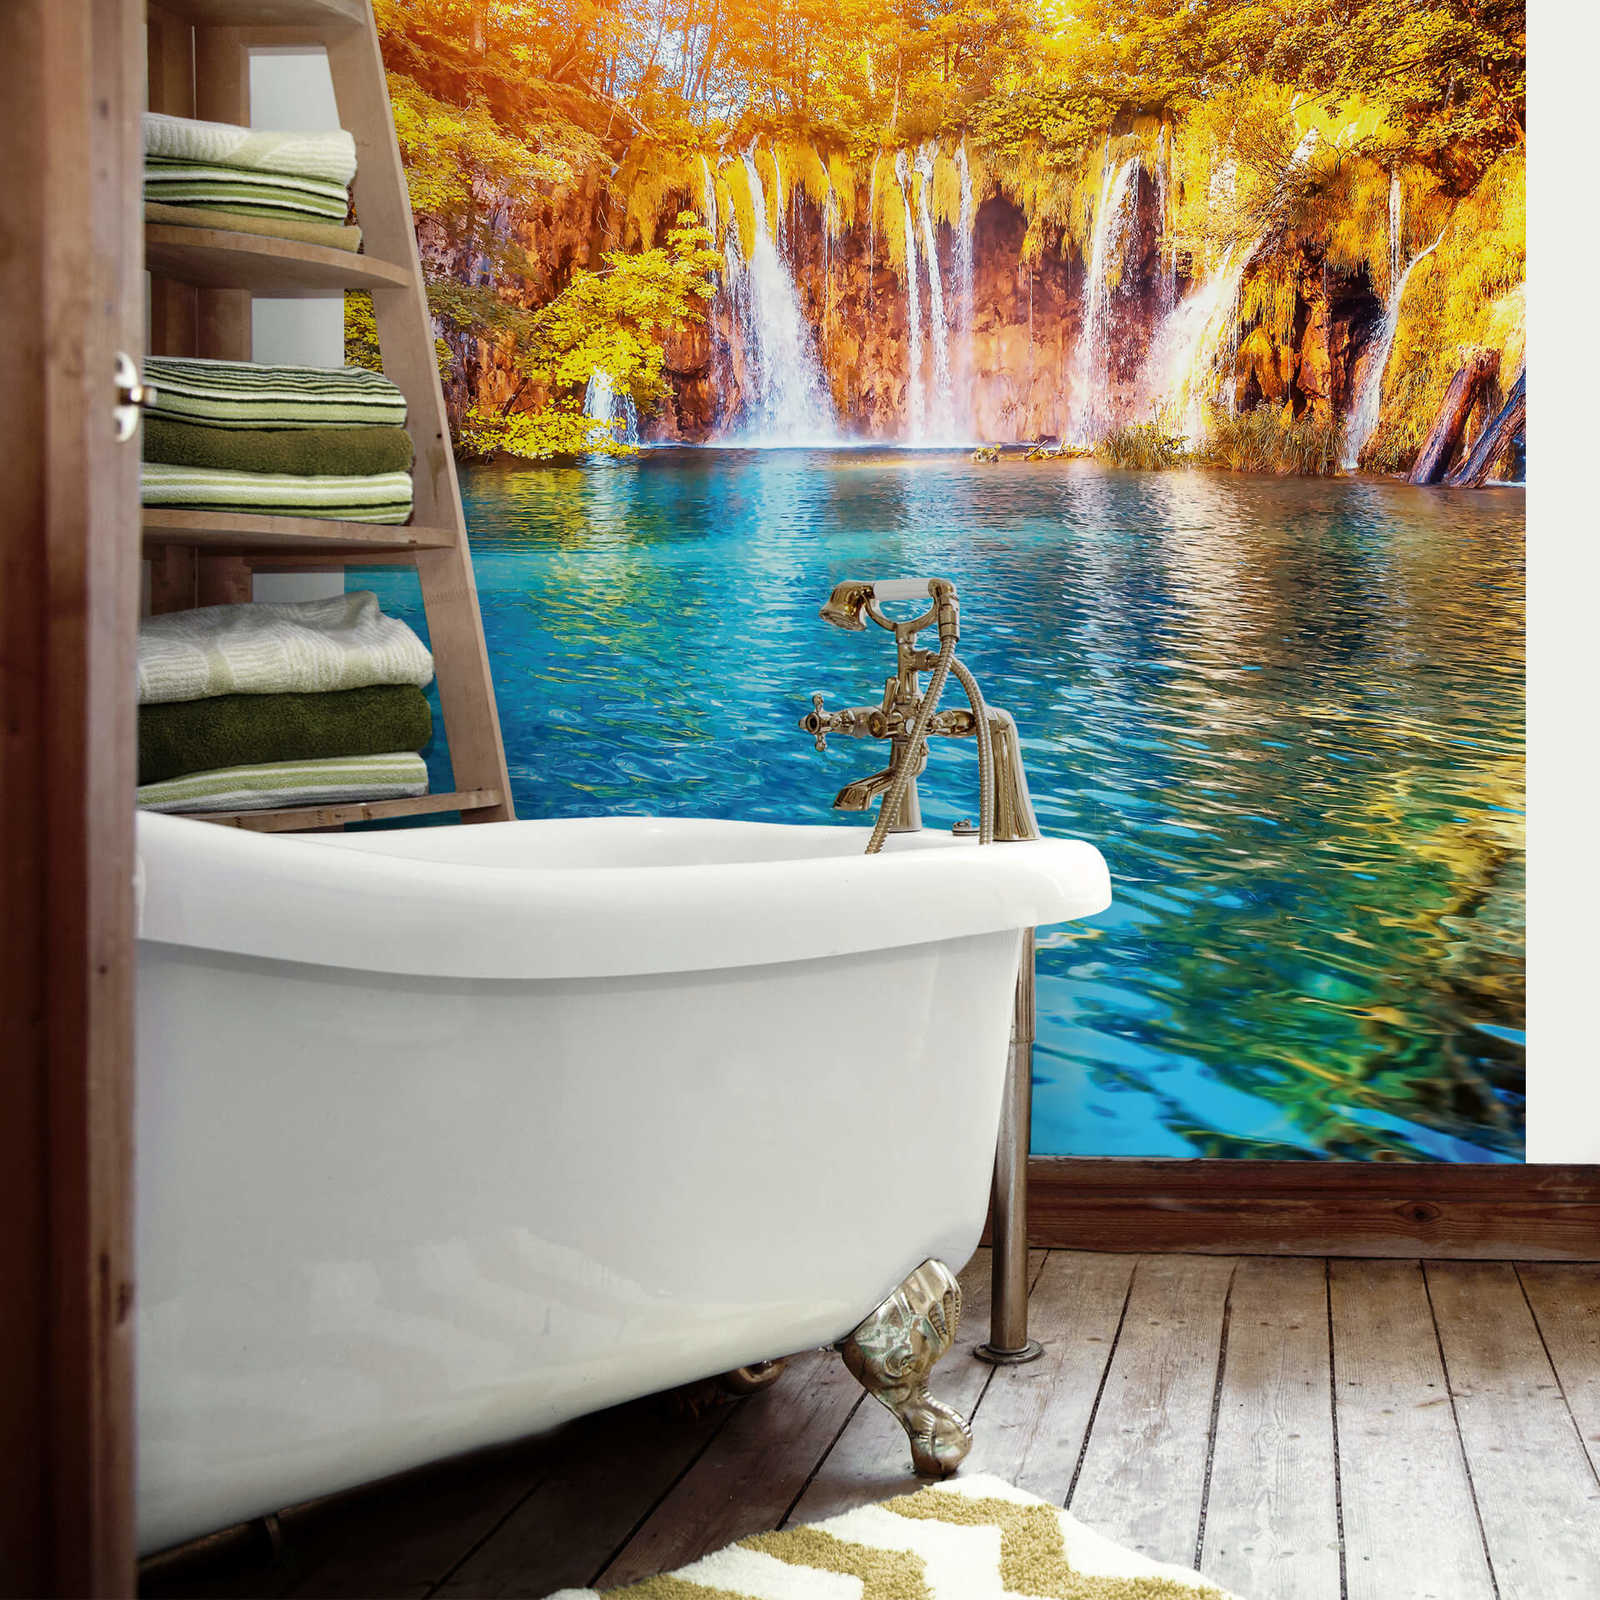             Waterfall mural with lake and forest landscape
        